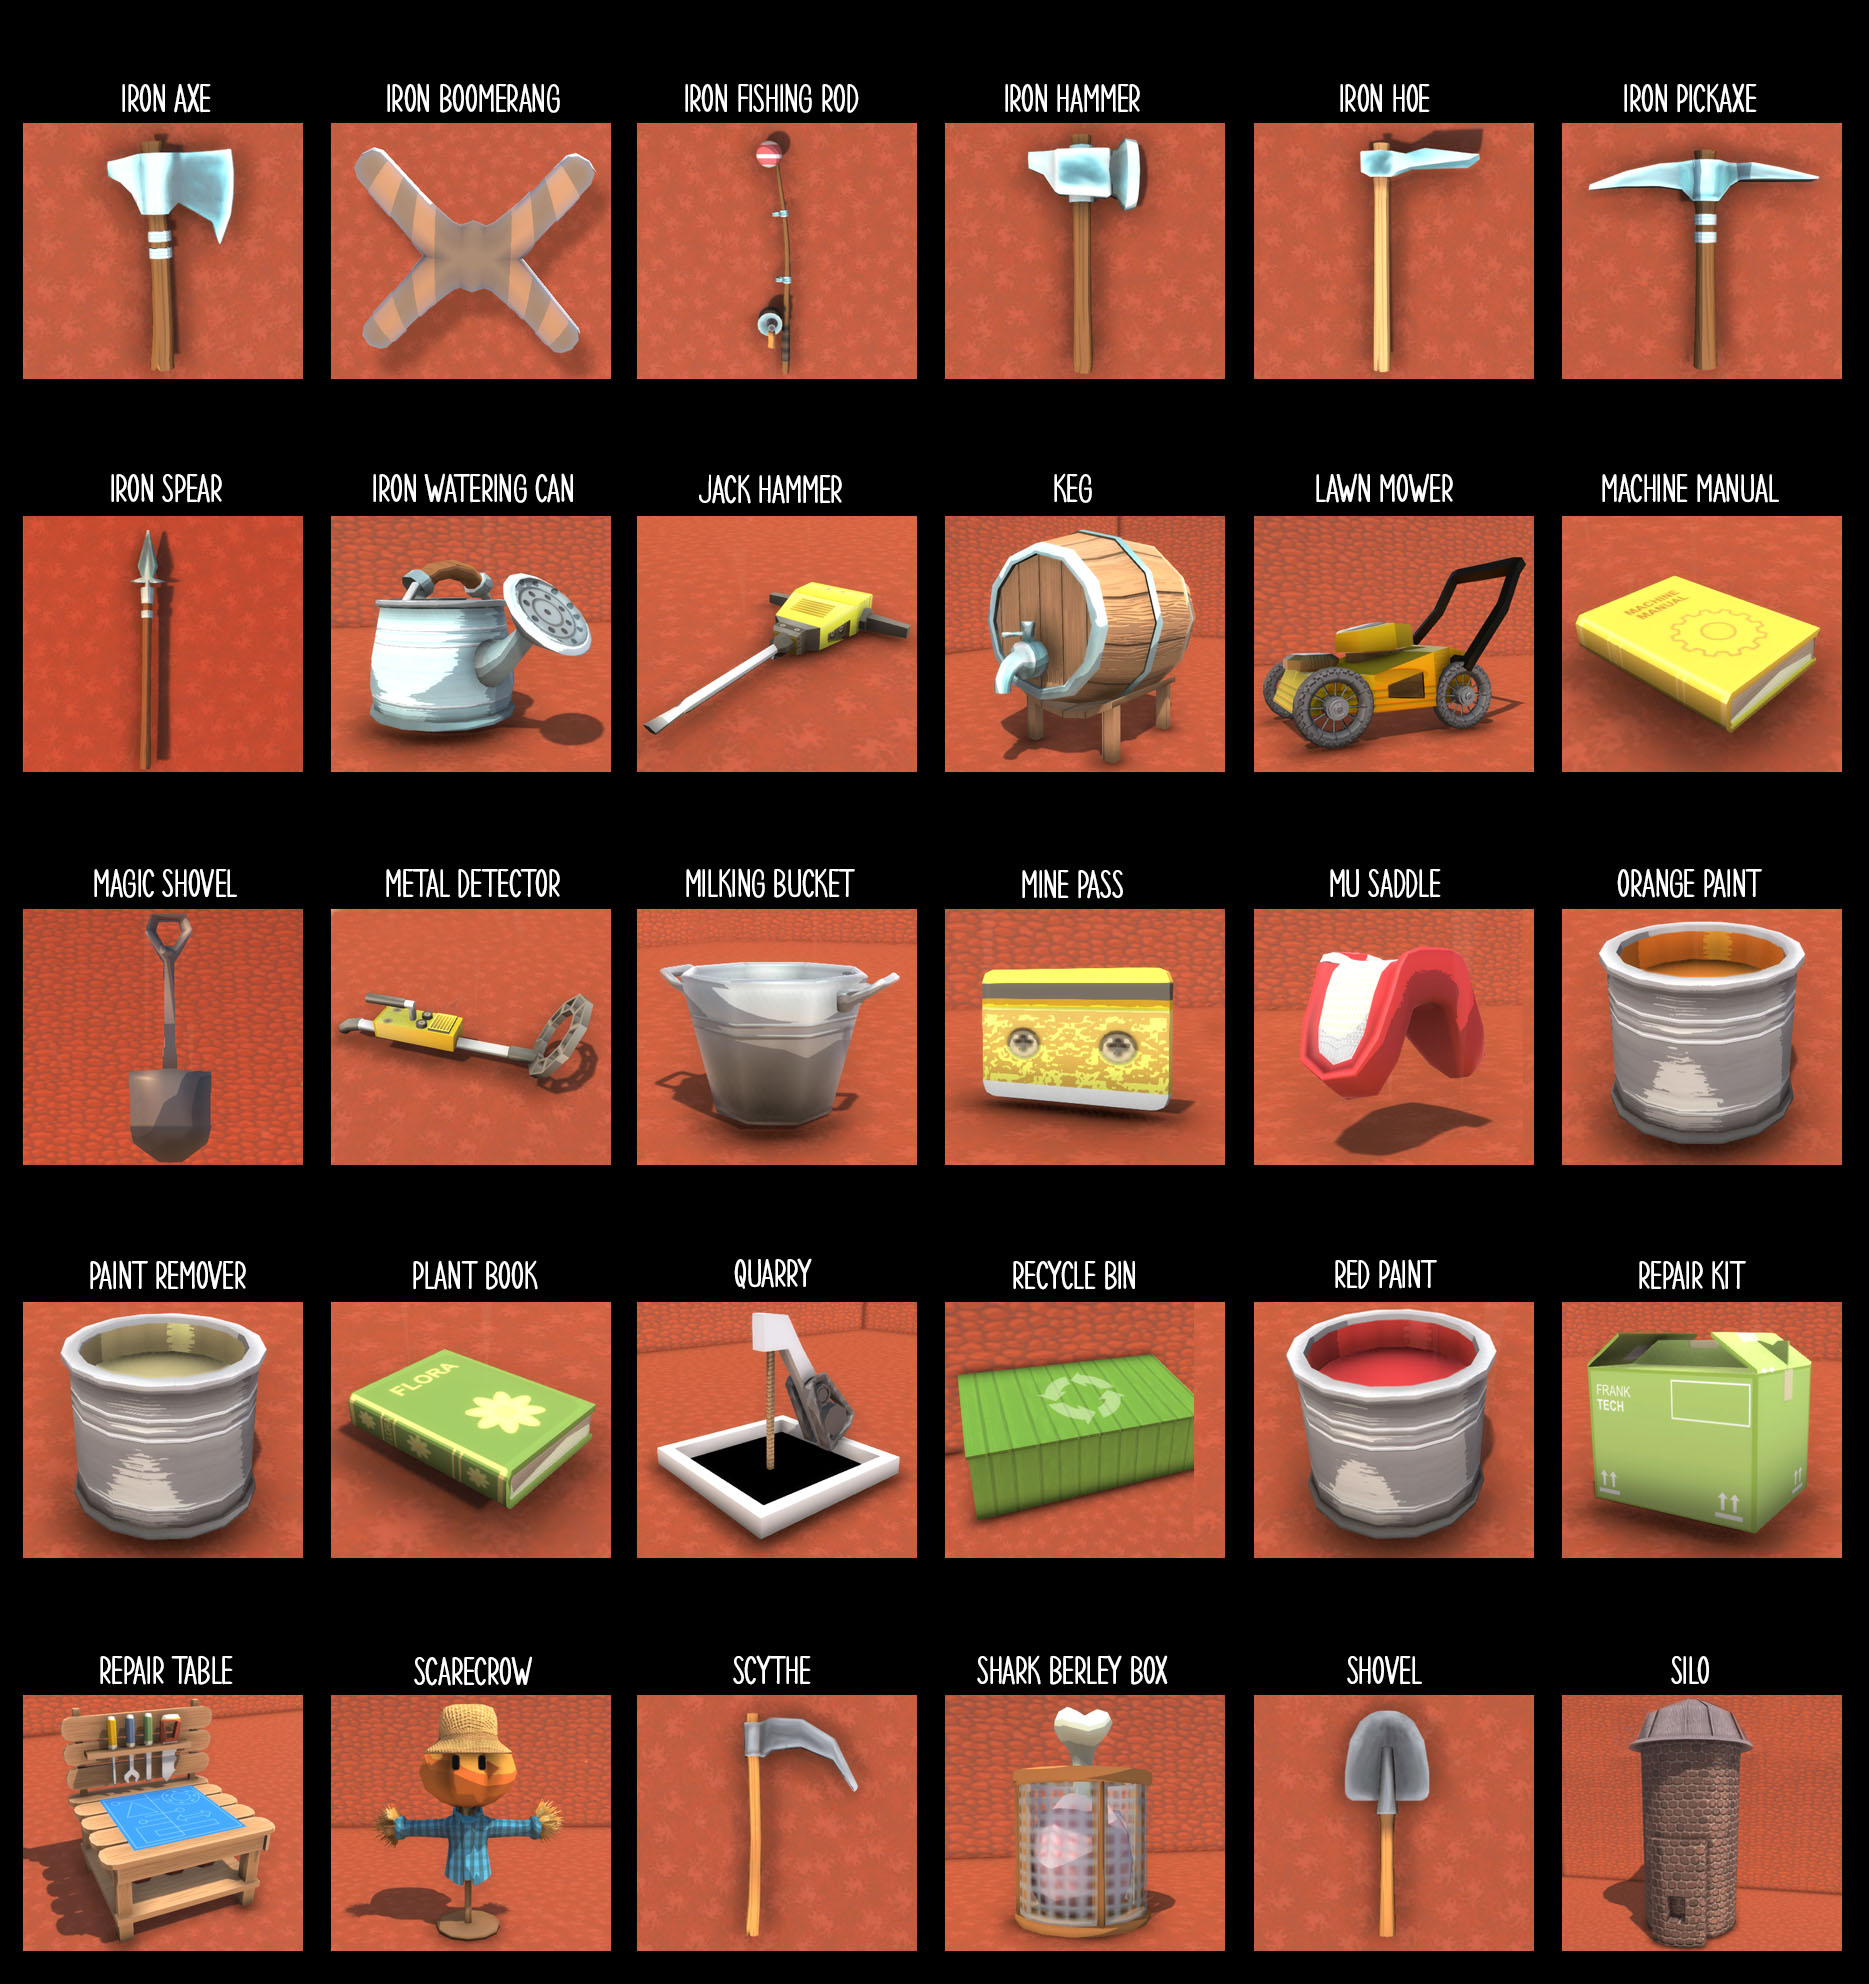 Dinkum - Complete Catalog With Pictures - Tools - 6A70D03